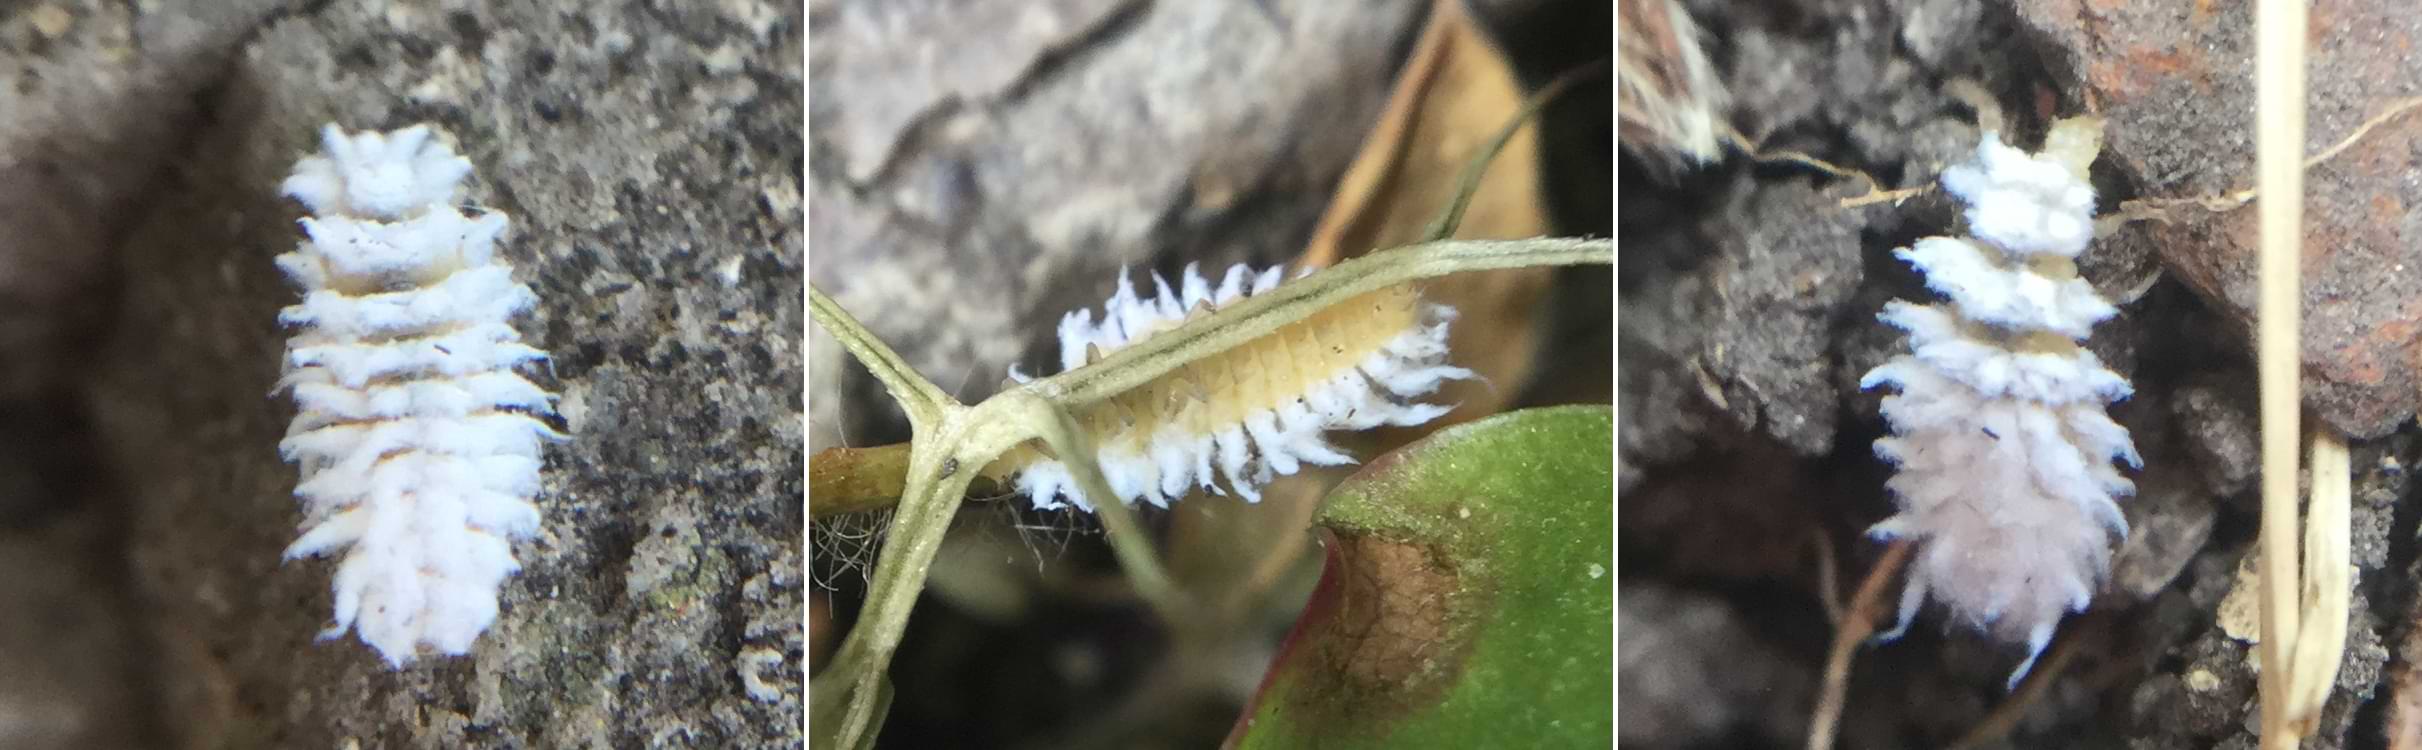 Three photos of a small beetle larvae crawling over rocks and plant stems. It is covered in a messy tangle of cream coloured tufts of wax.